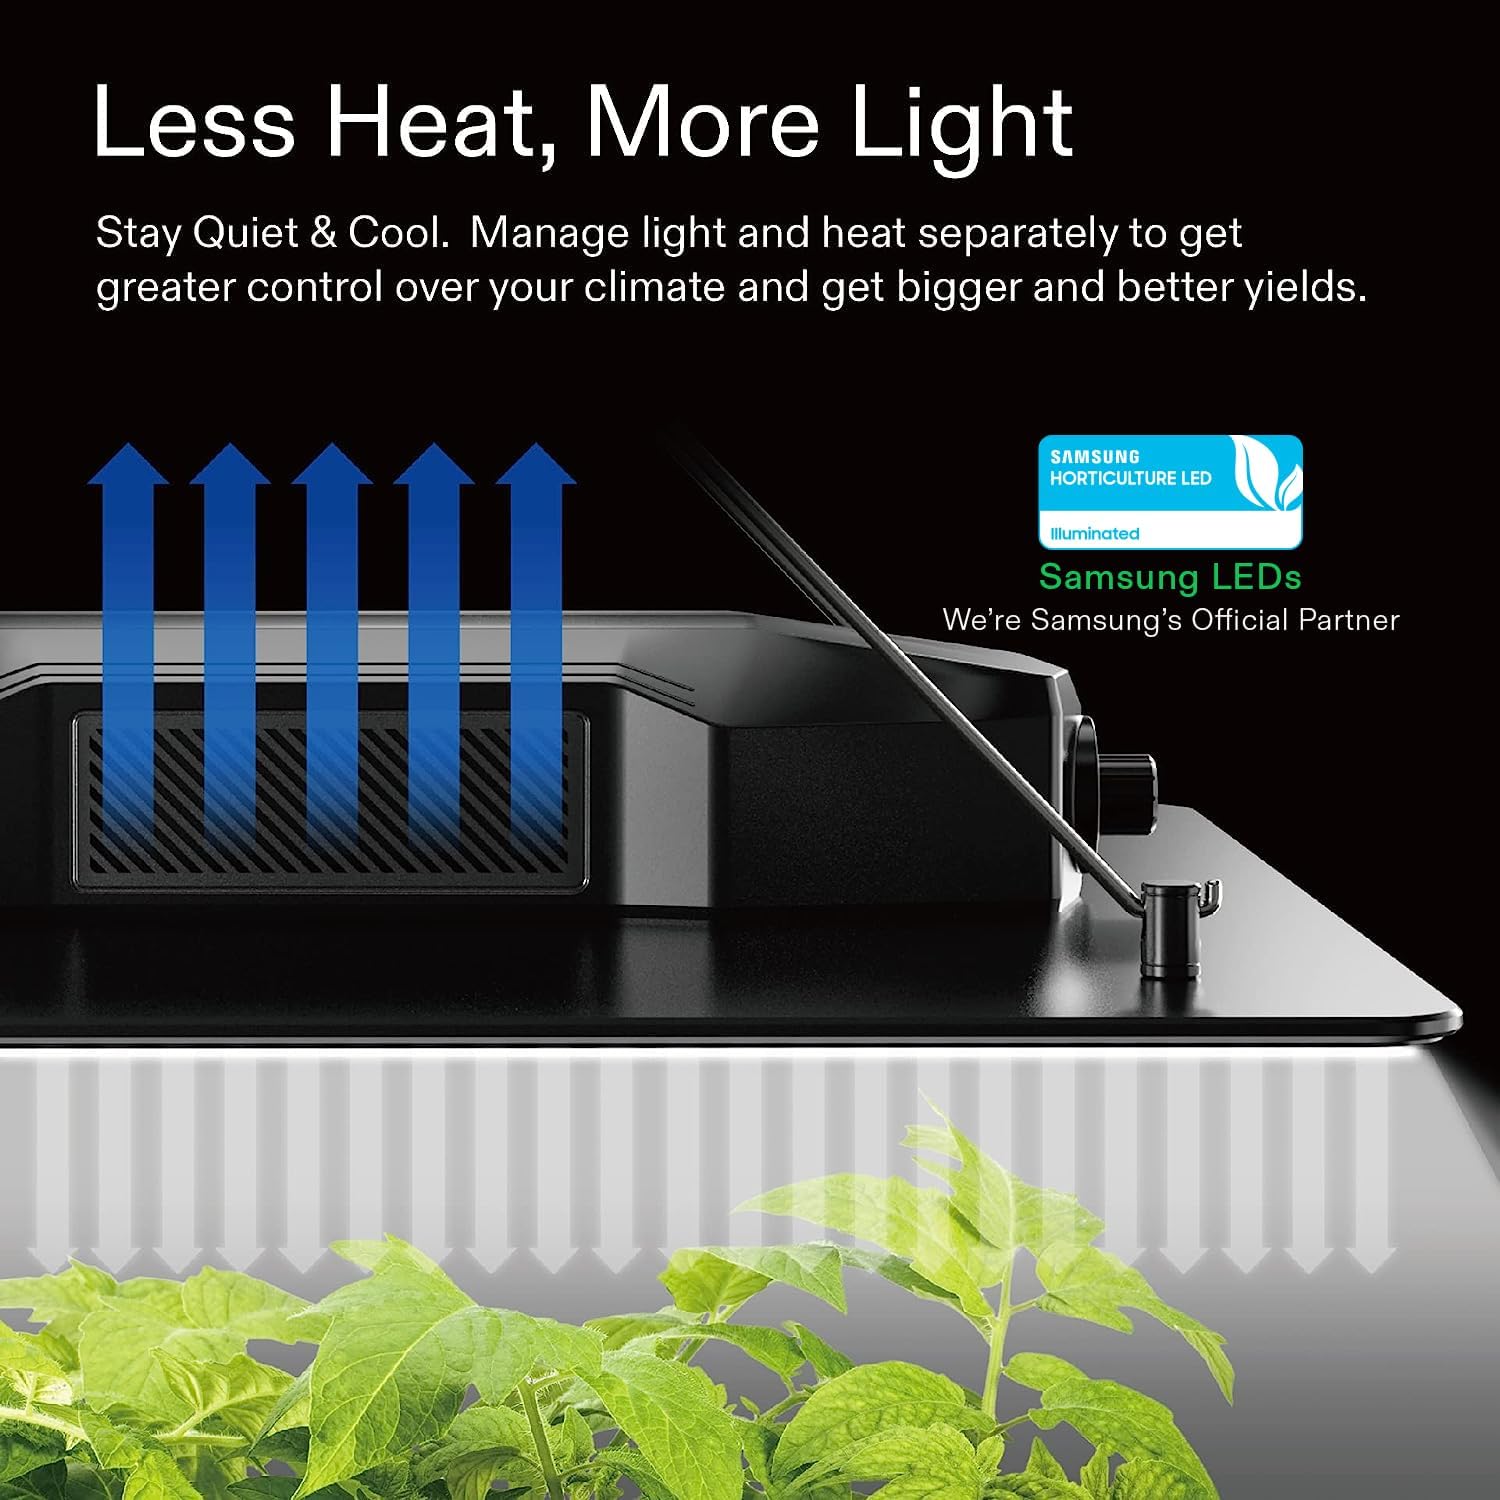 VIVOSUN VS1000 LED Grow Light with Samsung LM301 Diodes  Sosen Driver Dimmable Lights Sunlike Full Spectrum for Indoor Plants Seedling Veg and Bloom Lamps for 2x2/3x3 Tent